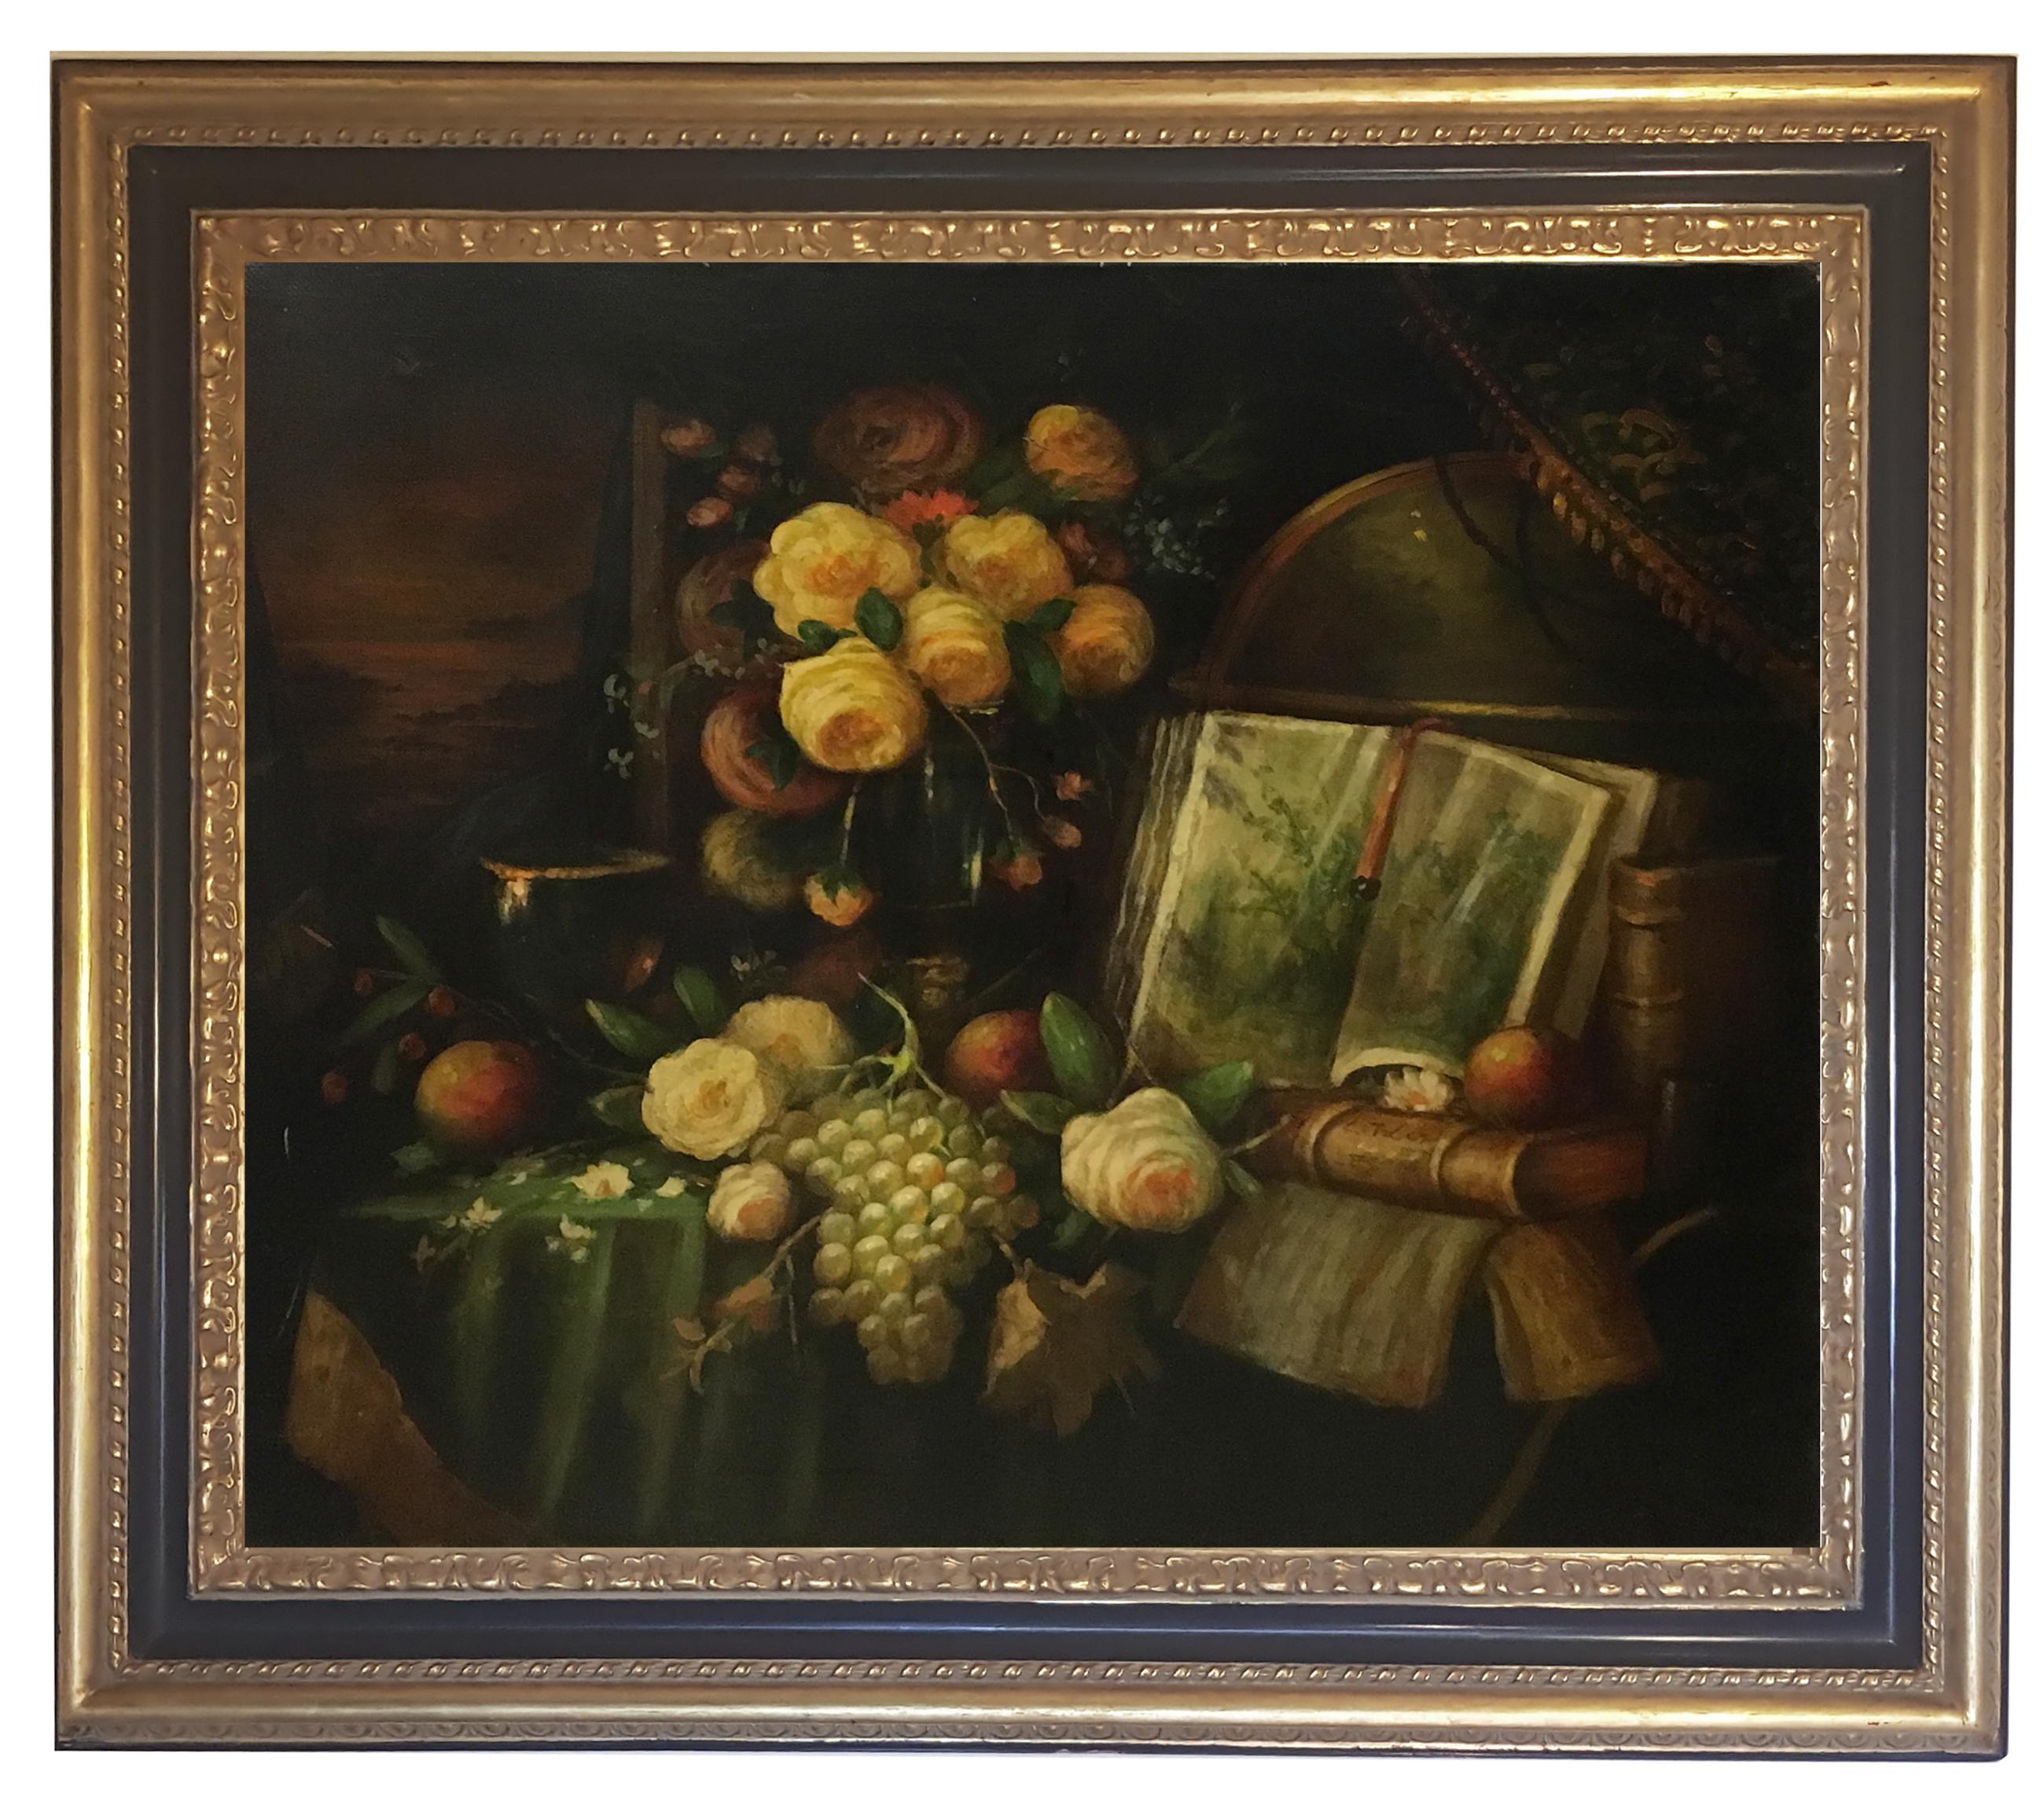 STILL LIFE - Oil on canvas cm. 80x90 by Massimo Reggiani, Italy 2007
The origins of still life can be found in Dutch painting. At the beginning of Dutch painting, artists included additional elements in their religious compositions, depicting them